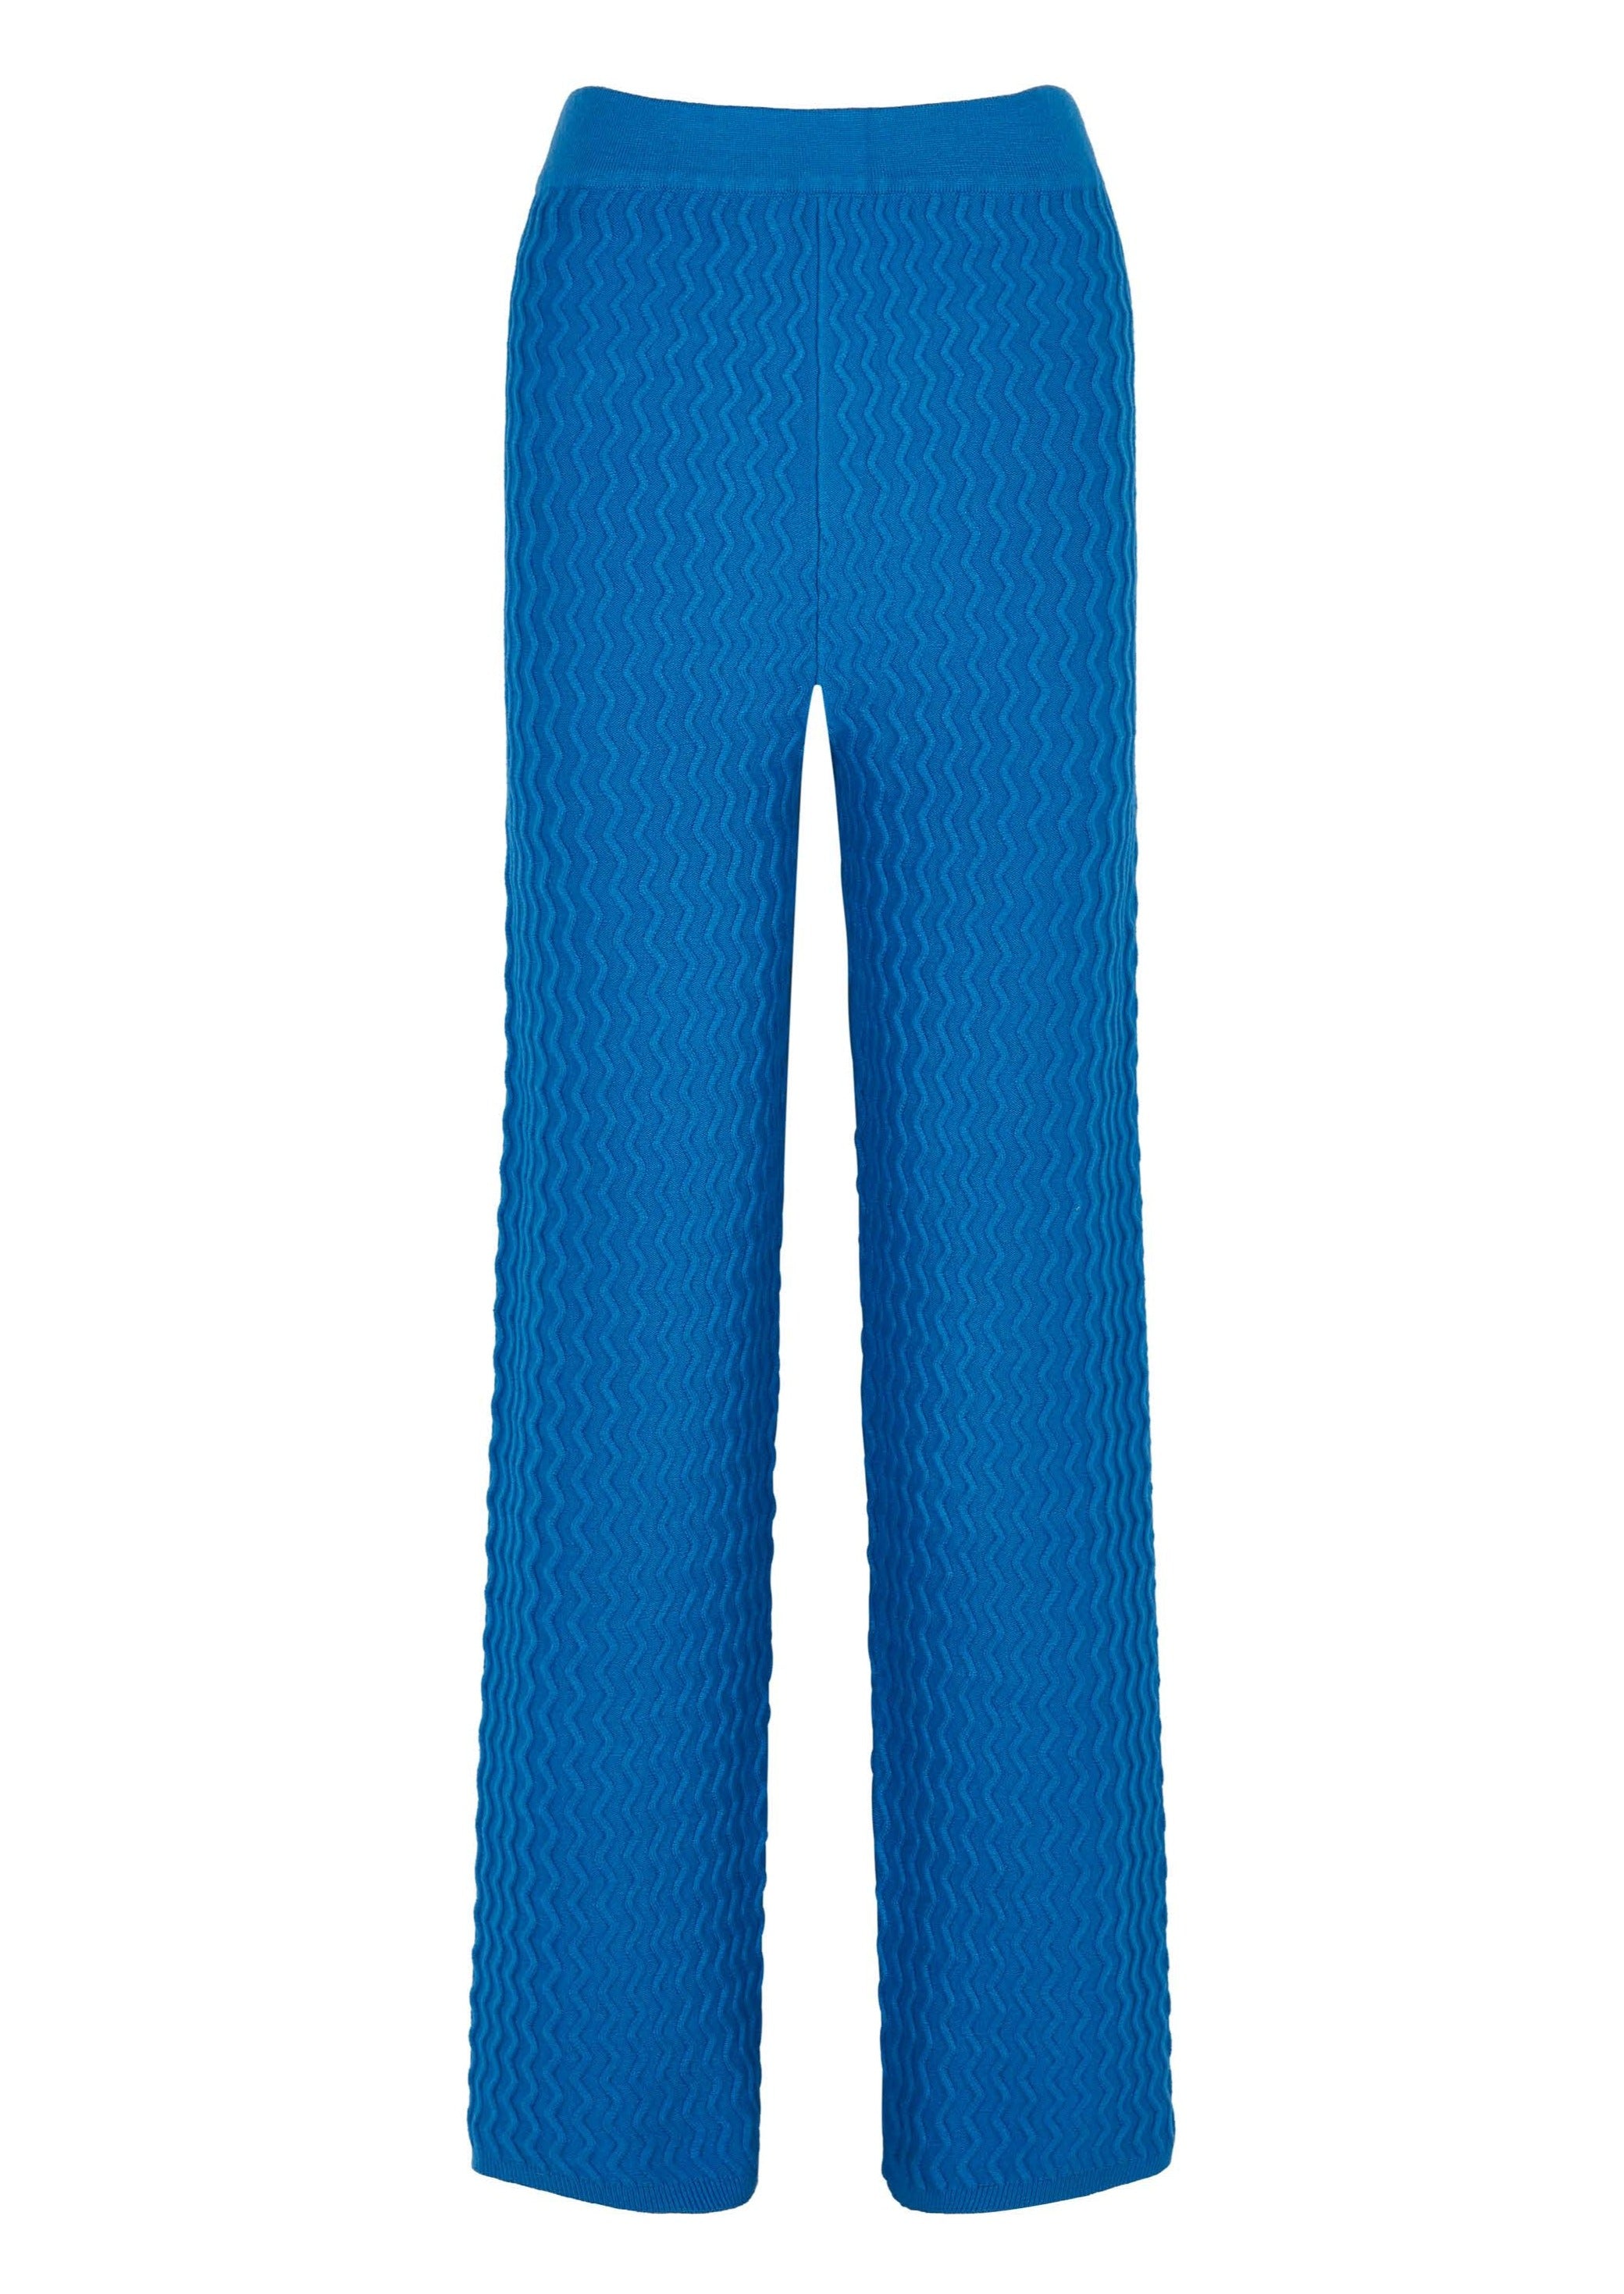 Blue knitted rib pants from the brand House Of Sunny